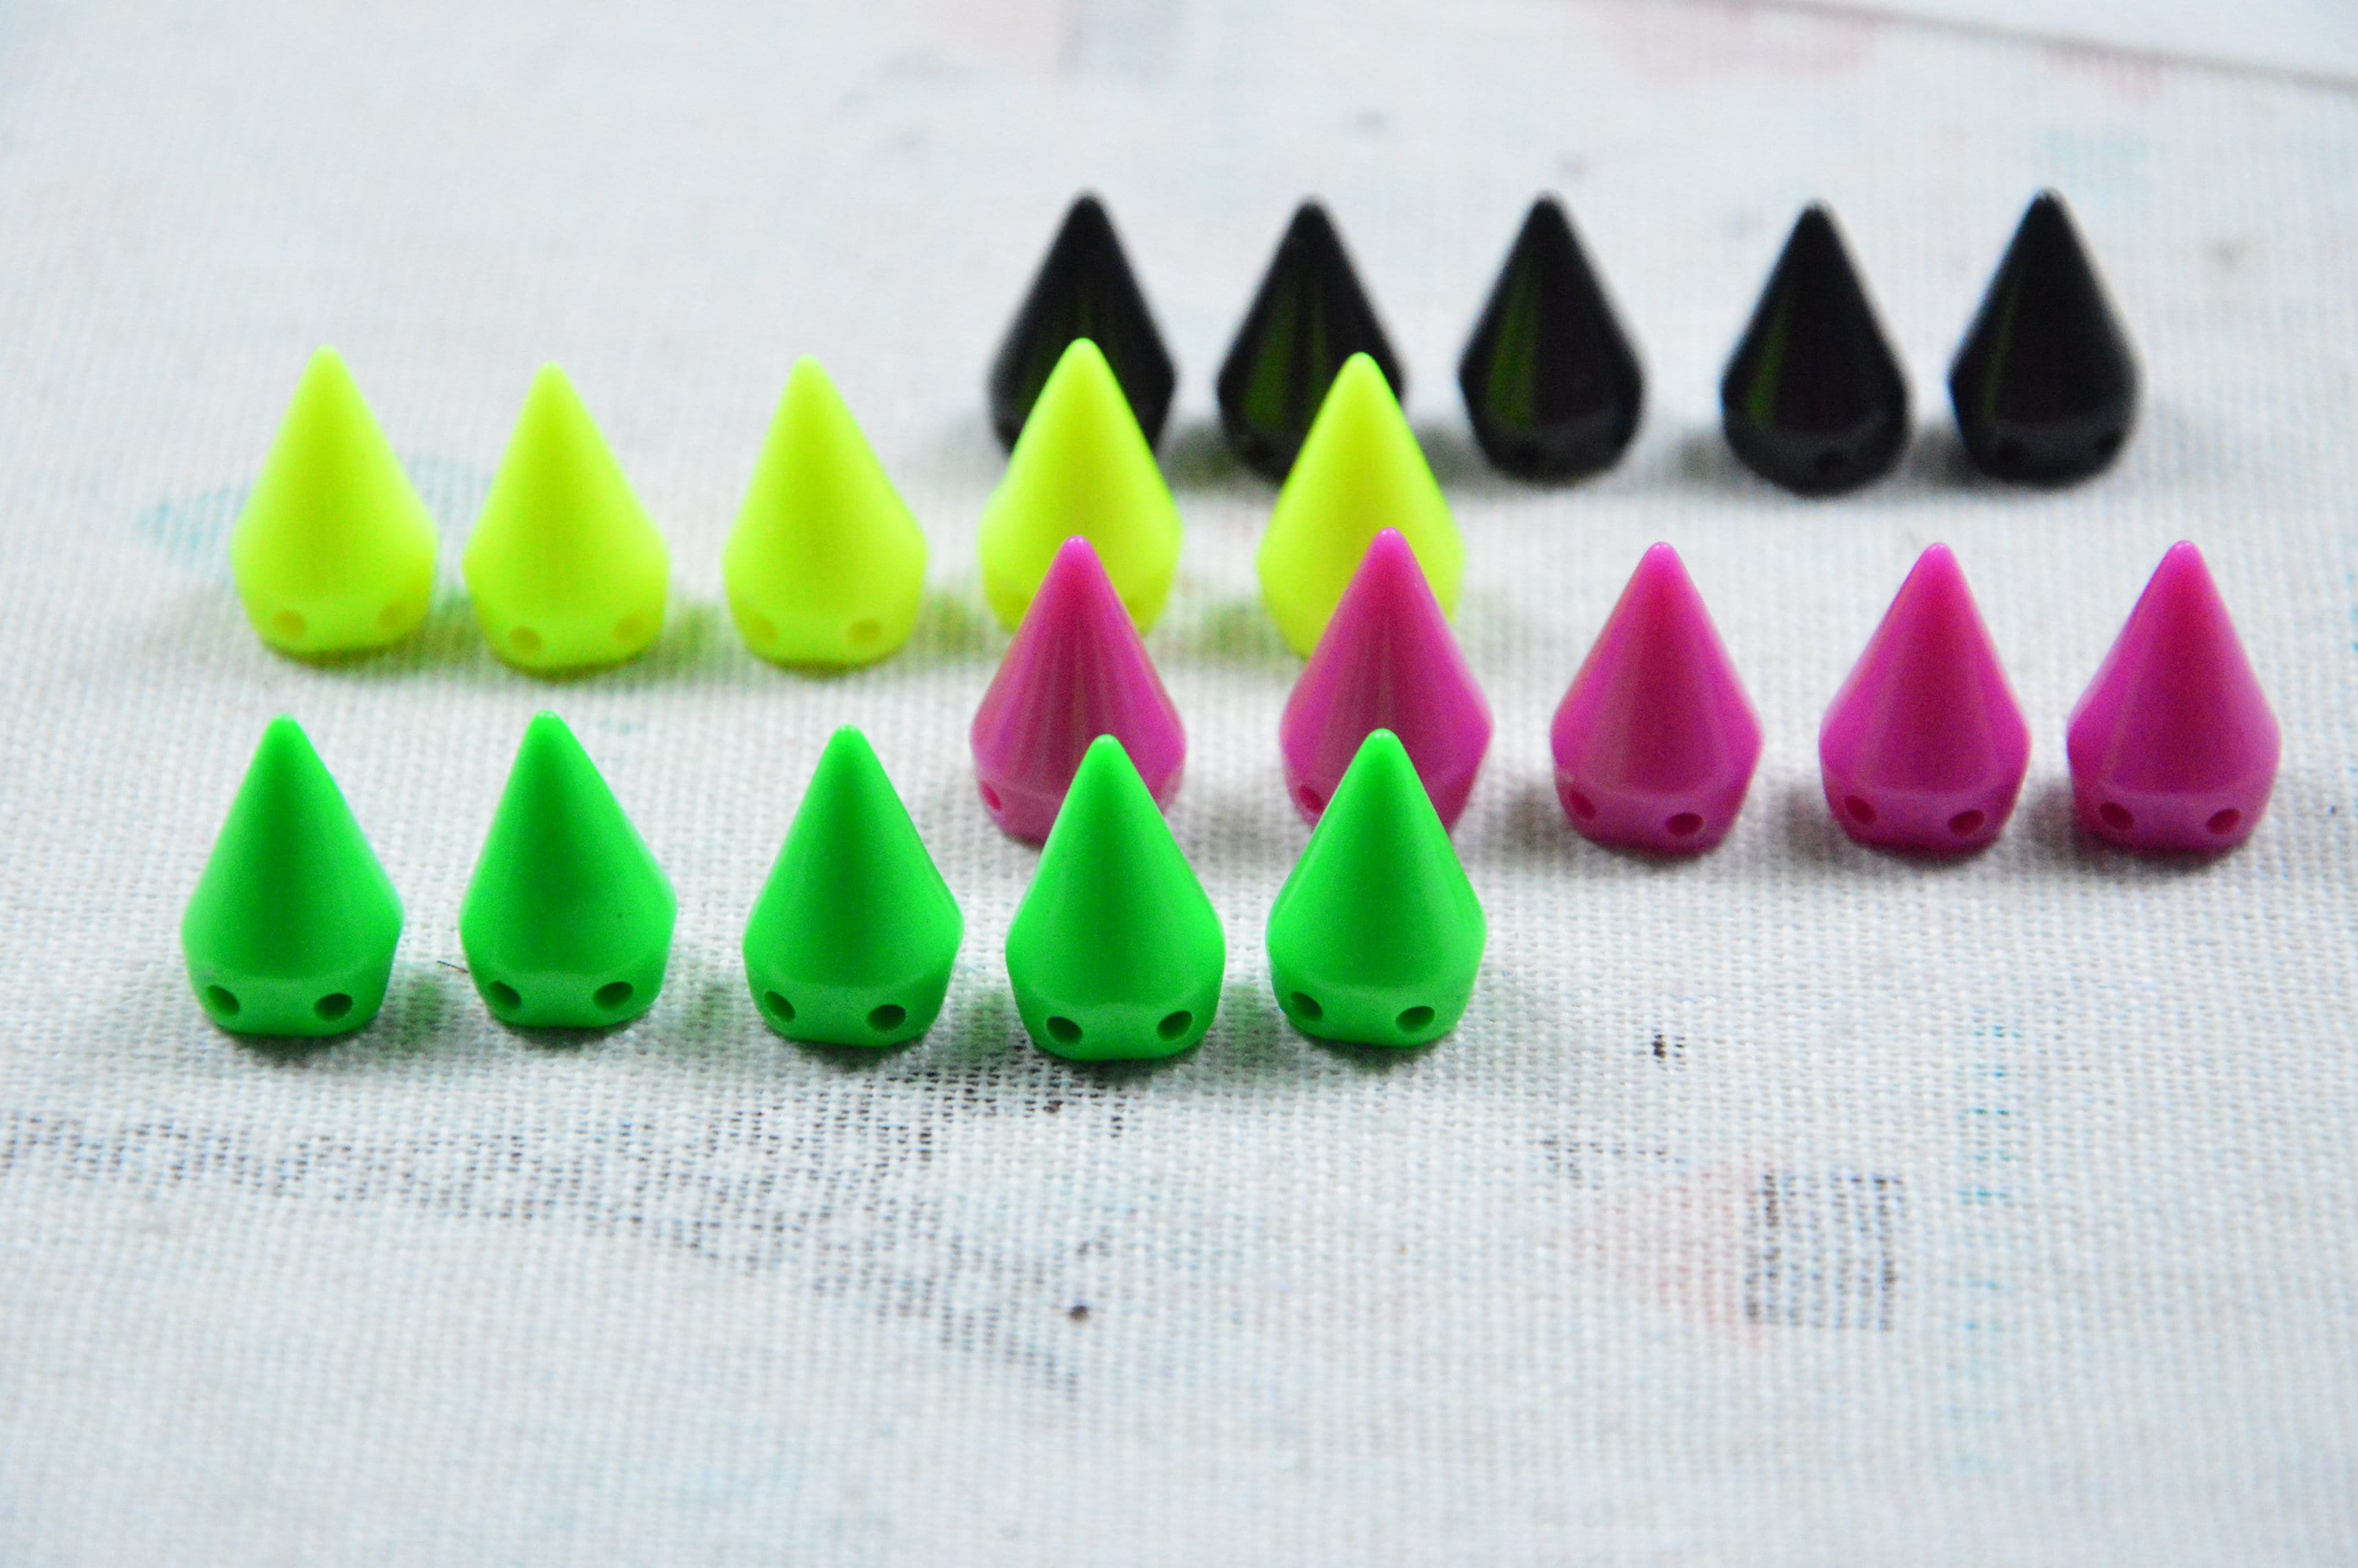 Cheerock 100pcs Black Cone Spikes Screwback Studs, 10mm Punk Style Cone  Spike Rivets, Zinc Alloy Cones Studs and Spikes for Crafts Punk Jacket